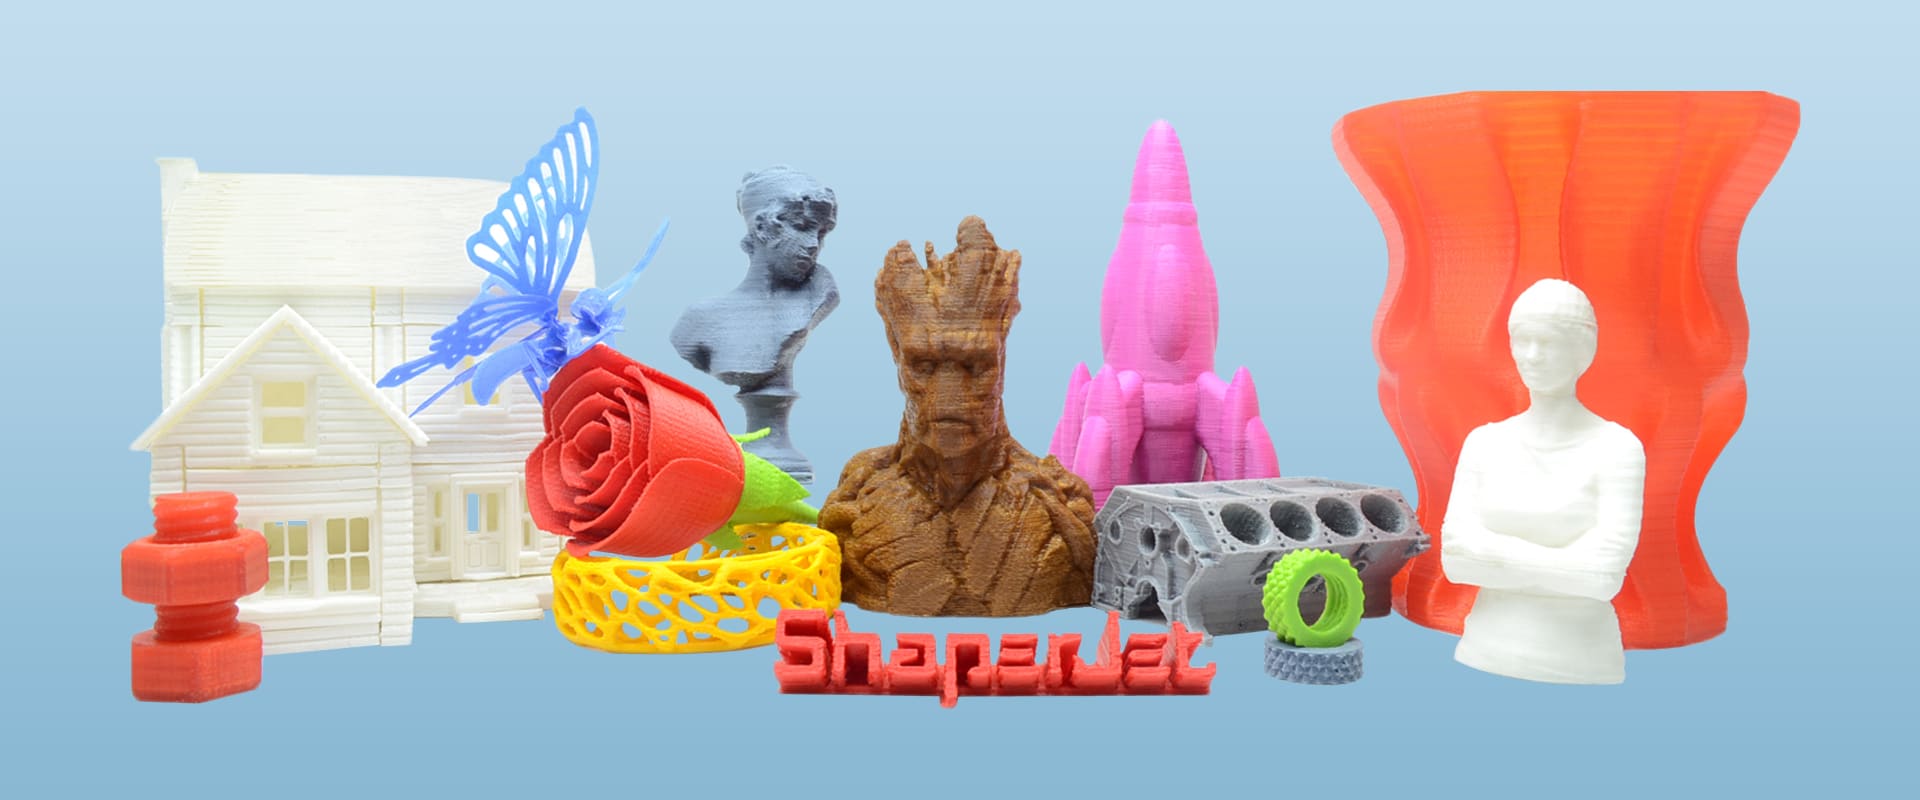 10-cool-things-to-3d-print-updated-april-2021